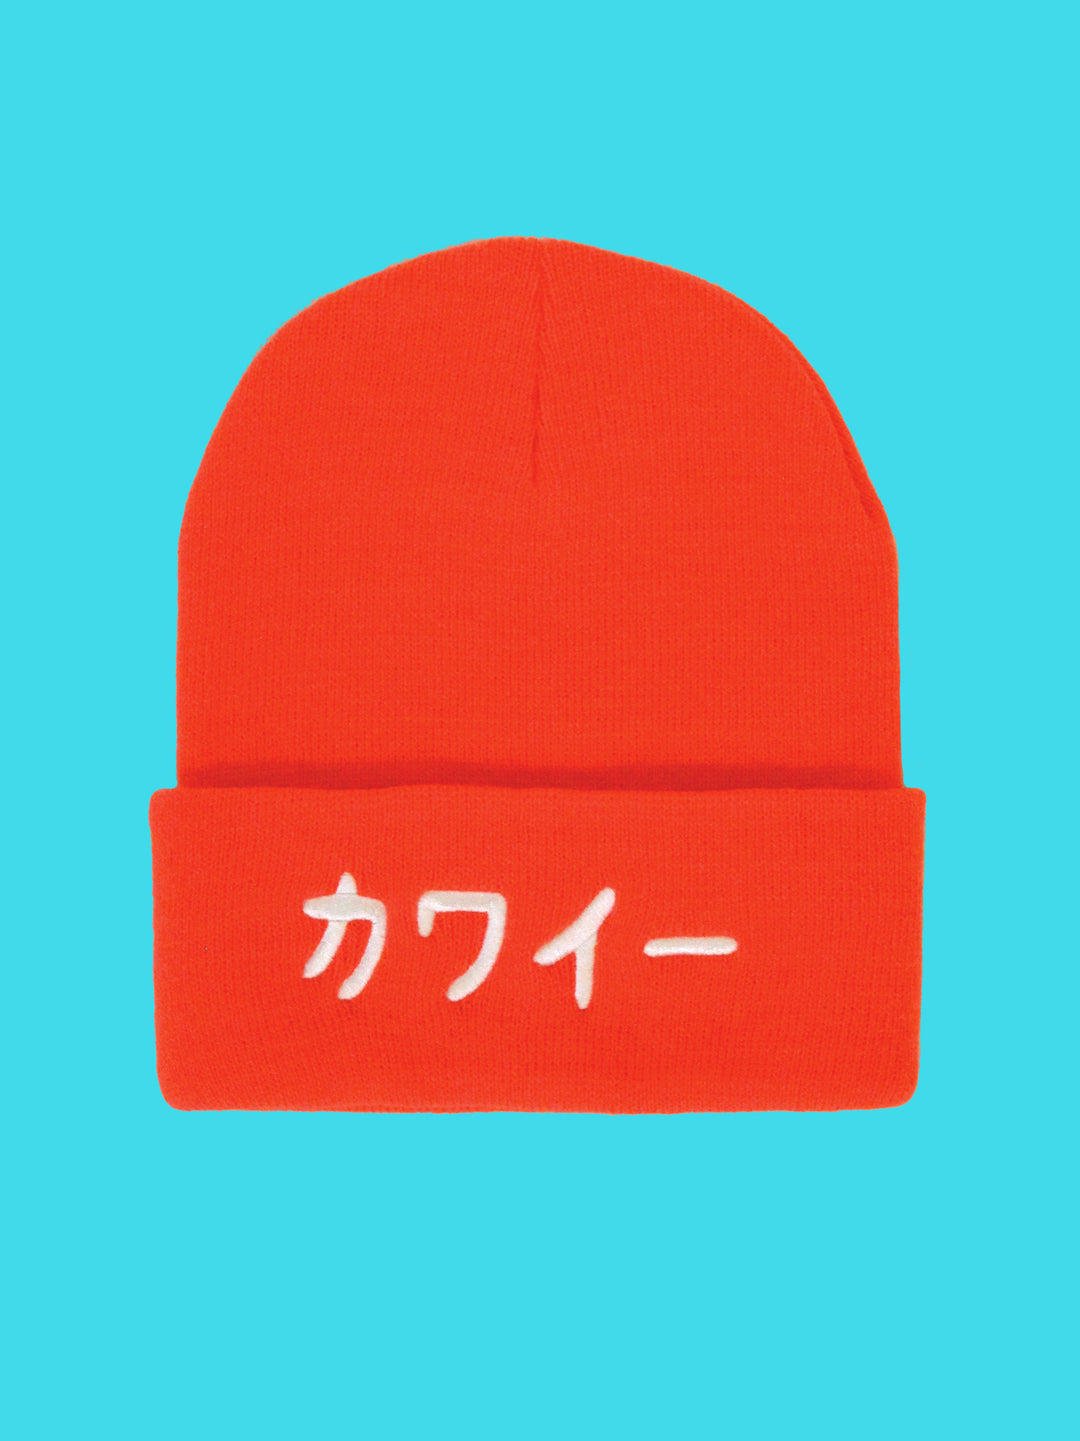 Bright orange Japanese beanie with the word 'Cute' or Kawaii embroidered in Japanese on it.